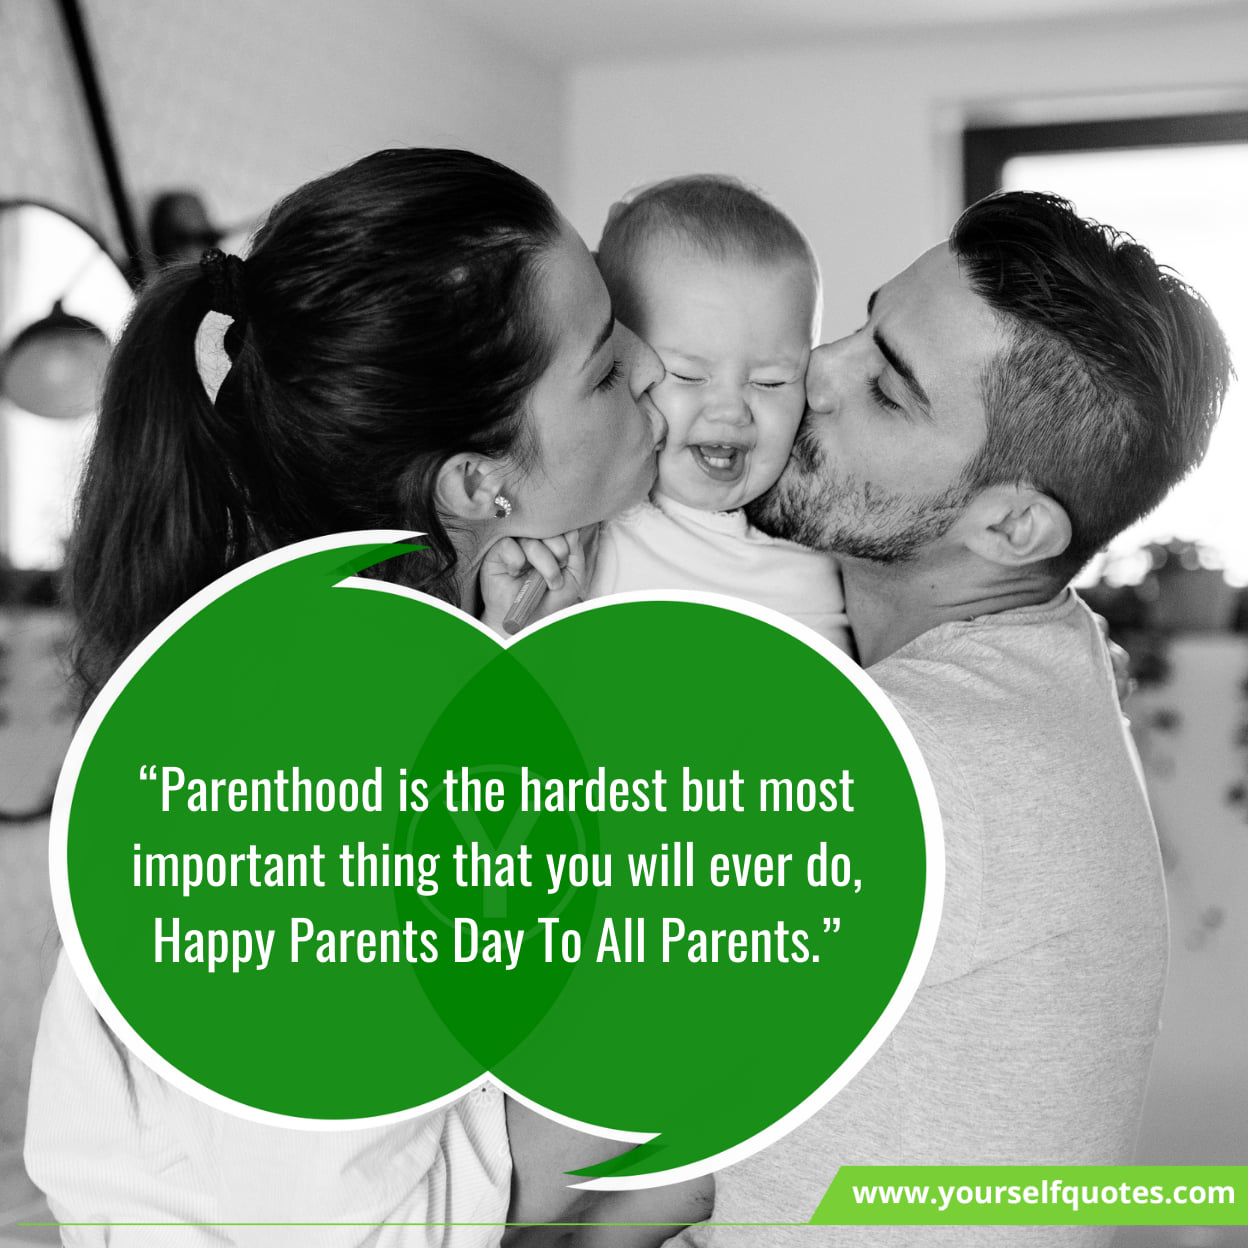 Inspiring Quotes On Parent's Day Quotes